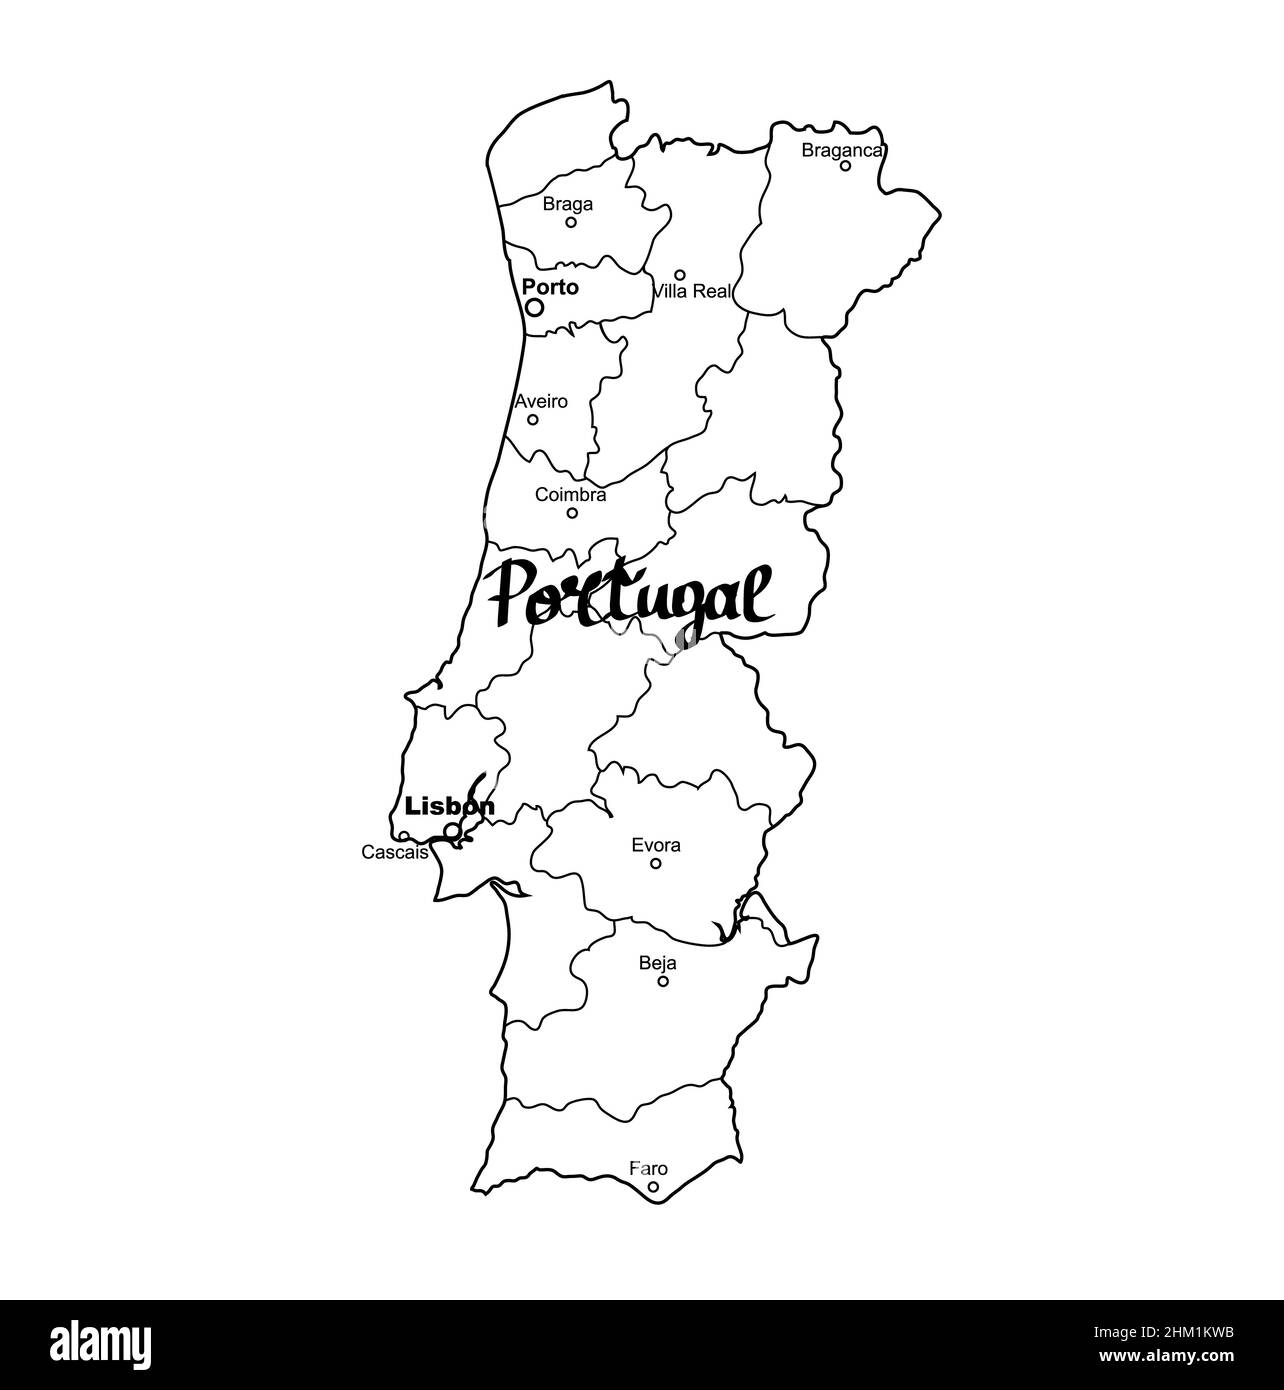 Map of Portugal. Bright illustration with map. Illustration with gray background. Portugal map with portuguese major cities. Illustration. Stock Photo